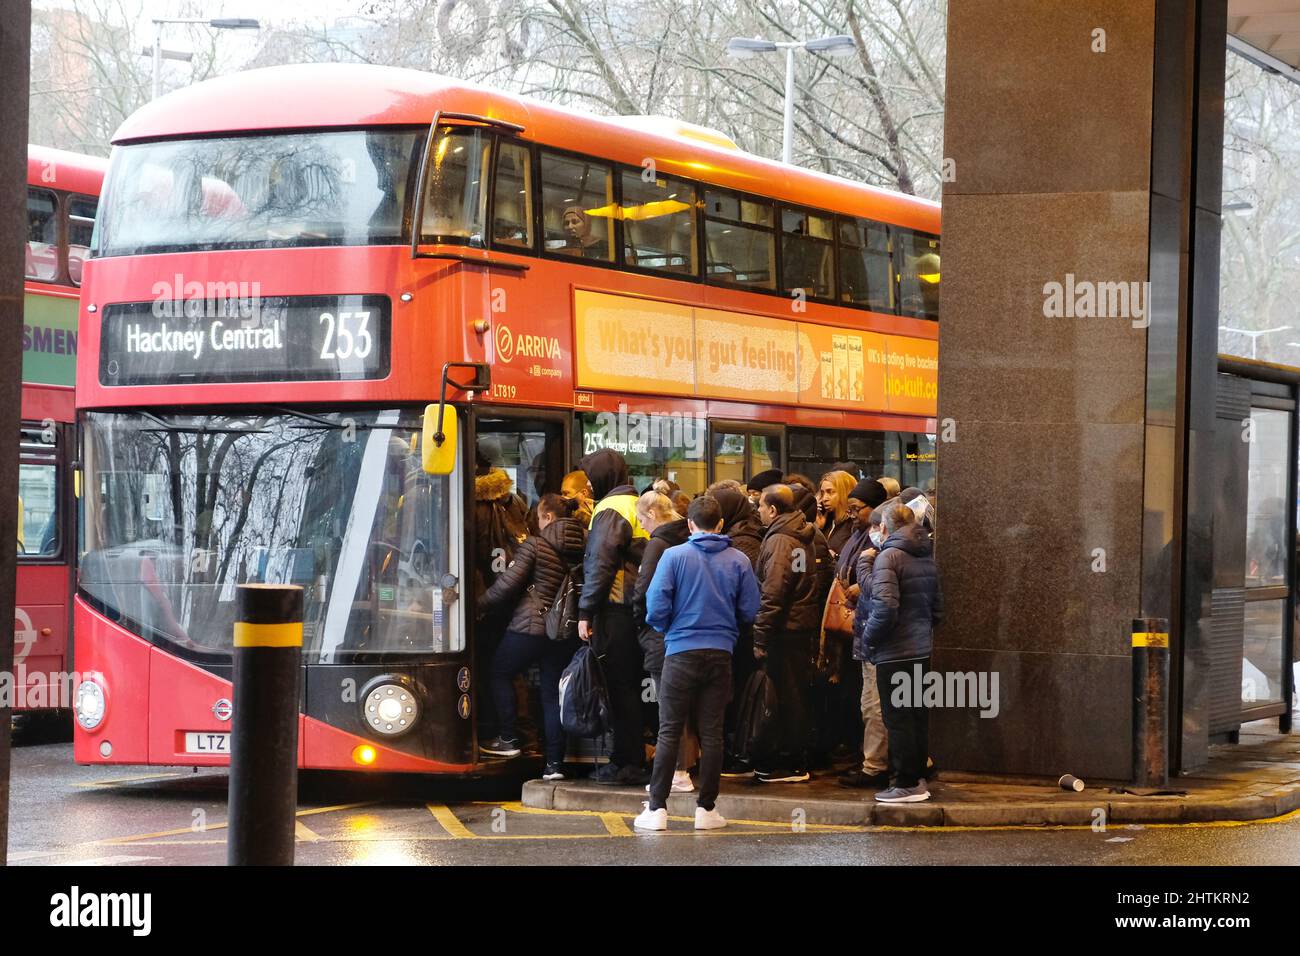 London, UK, 1st Mar, 2022. Long queues were seen for buses as tourists and commuters found alternative ways to complete their journey this afternoon, via bus, taxi or cycling, amid a Tube strike affecting all lines with a skeleton service in a few areas. The strike called by the RMT Union over threats of 600 job losses and pension cuts saw 10,000 staff walk out for 24 hours. Credit: Eleventh Hour Photography/Alamy Live News Stock Photo